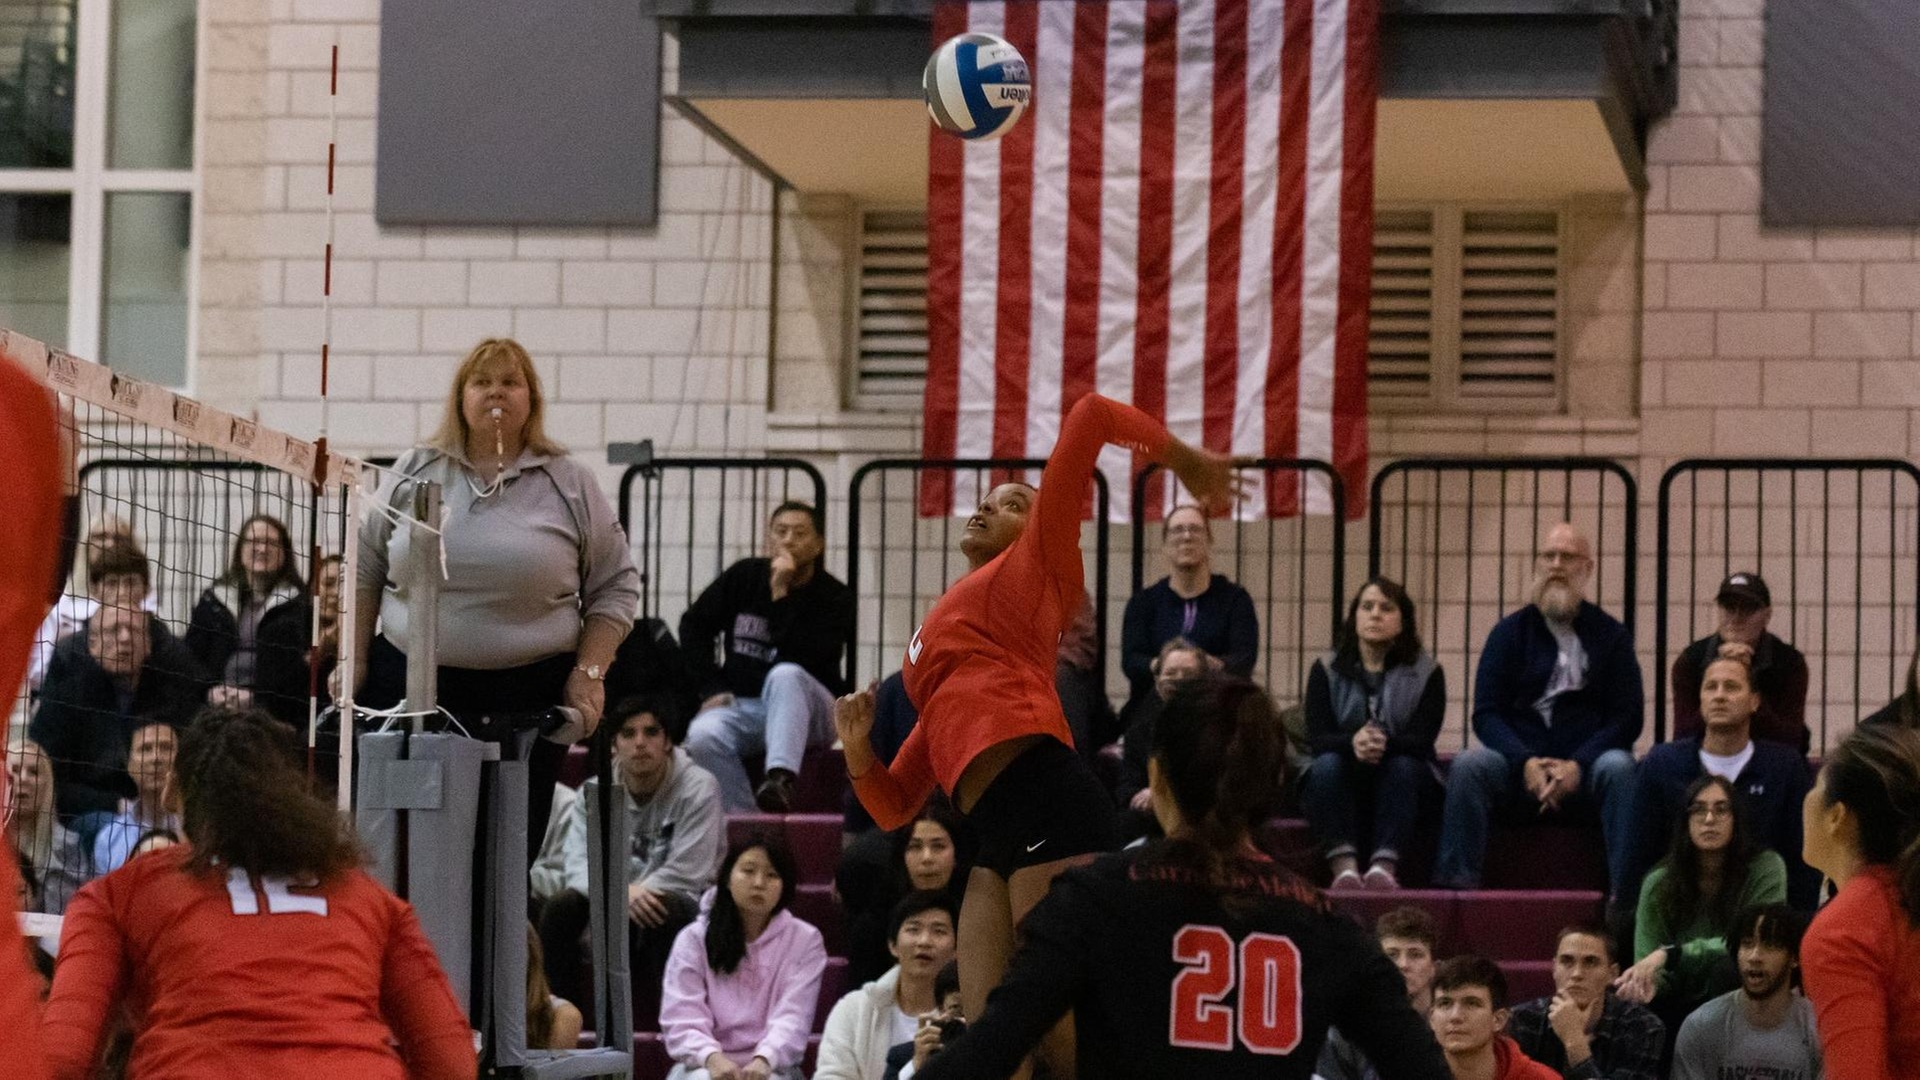 women's volleyball match with a player jumping in the air to hit the ball with her left arm and fans sitting in the background